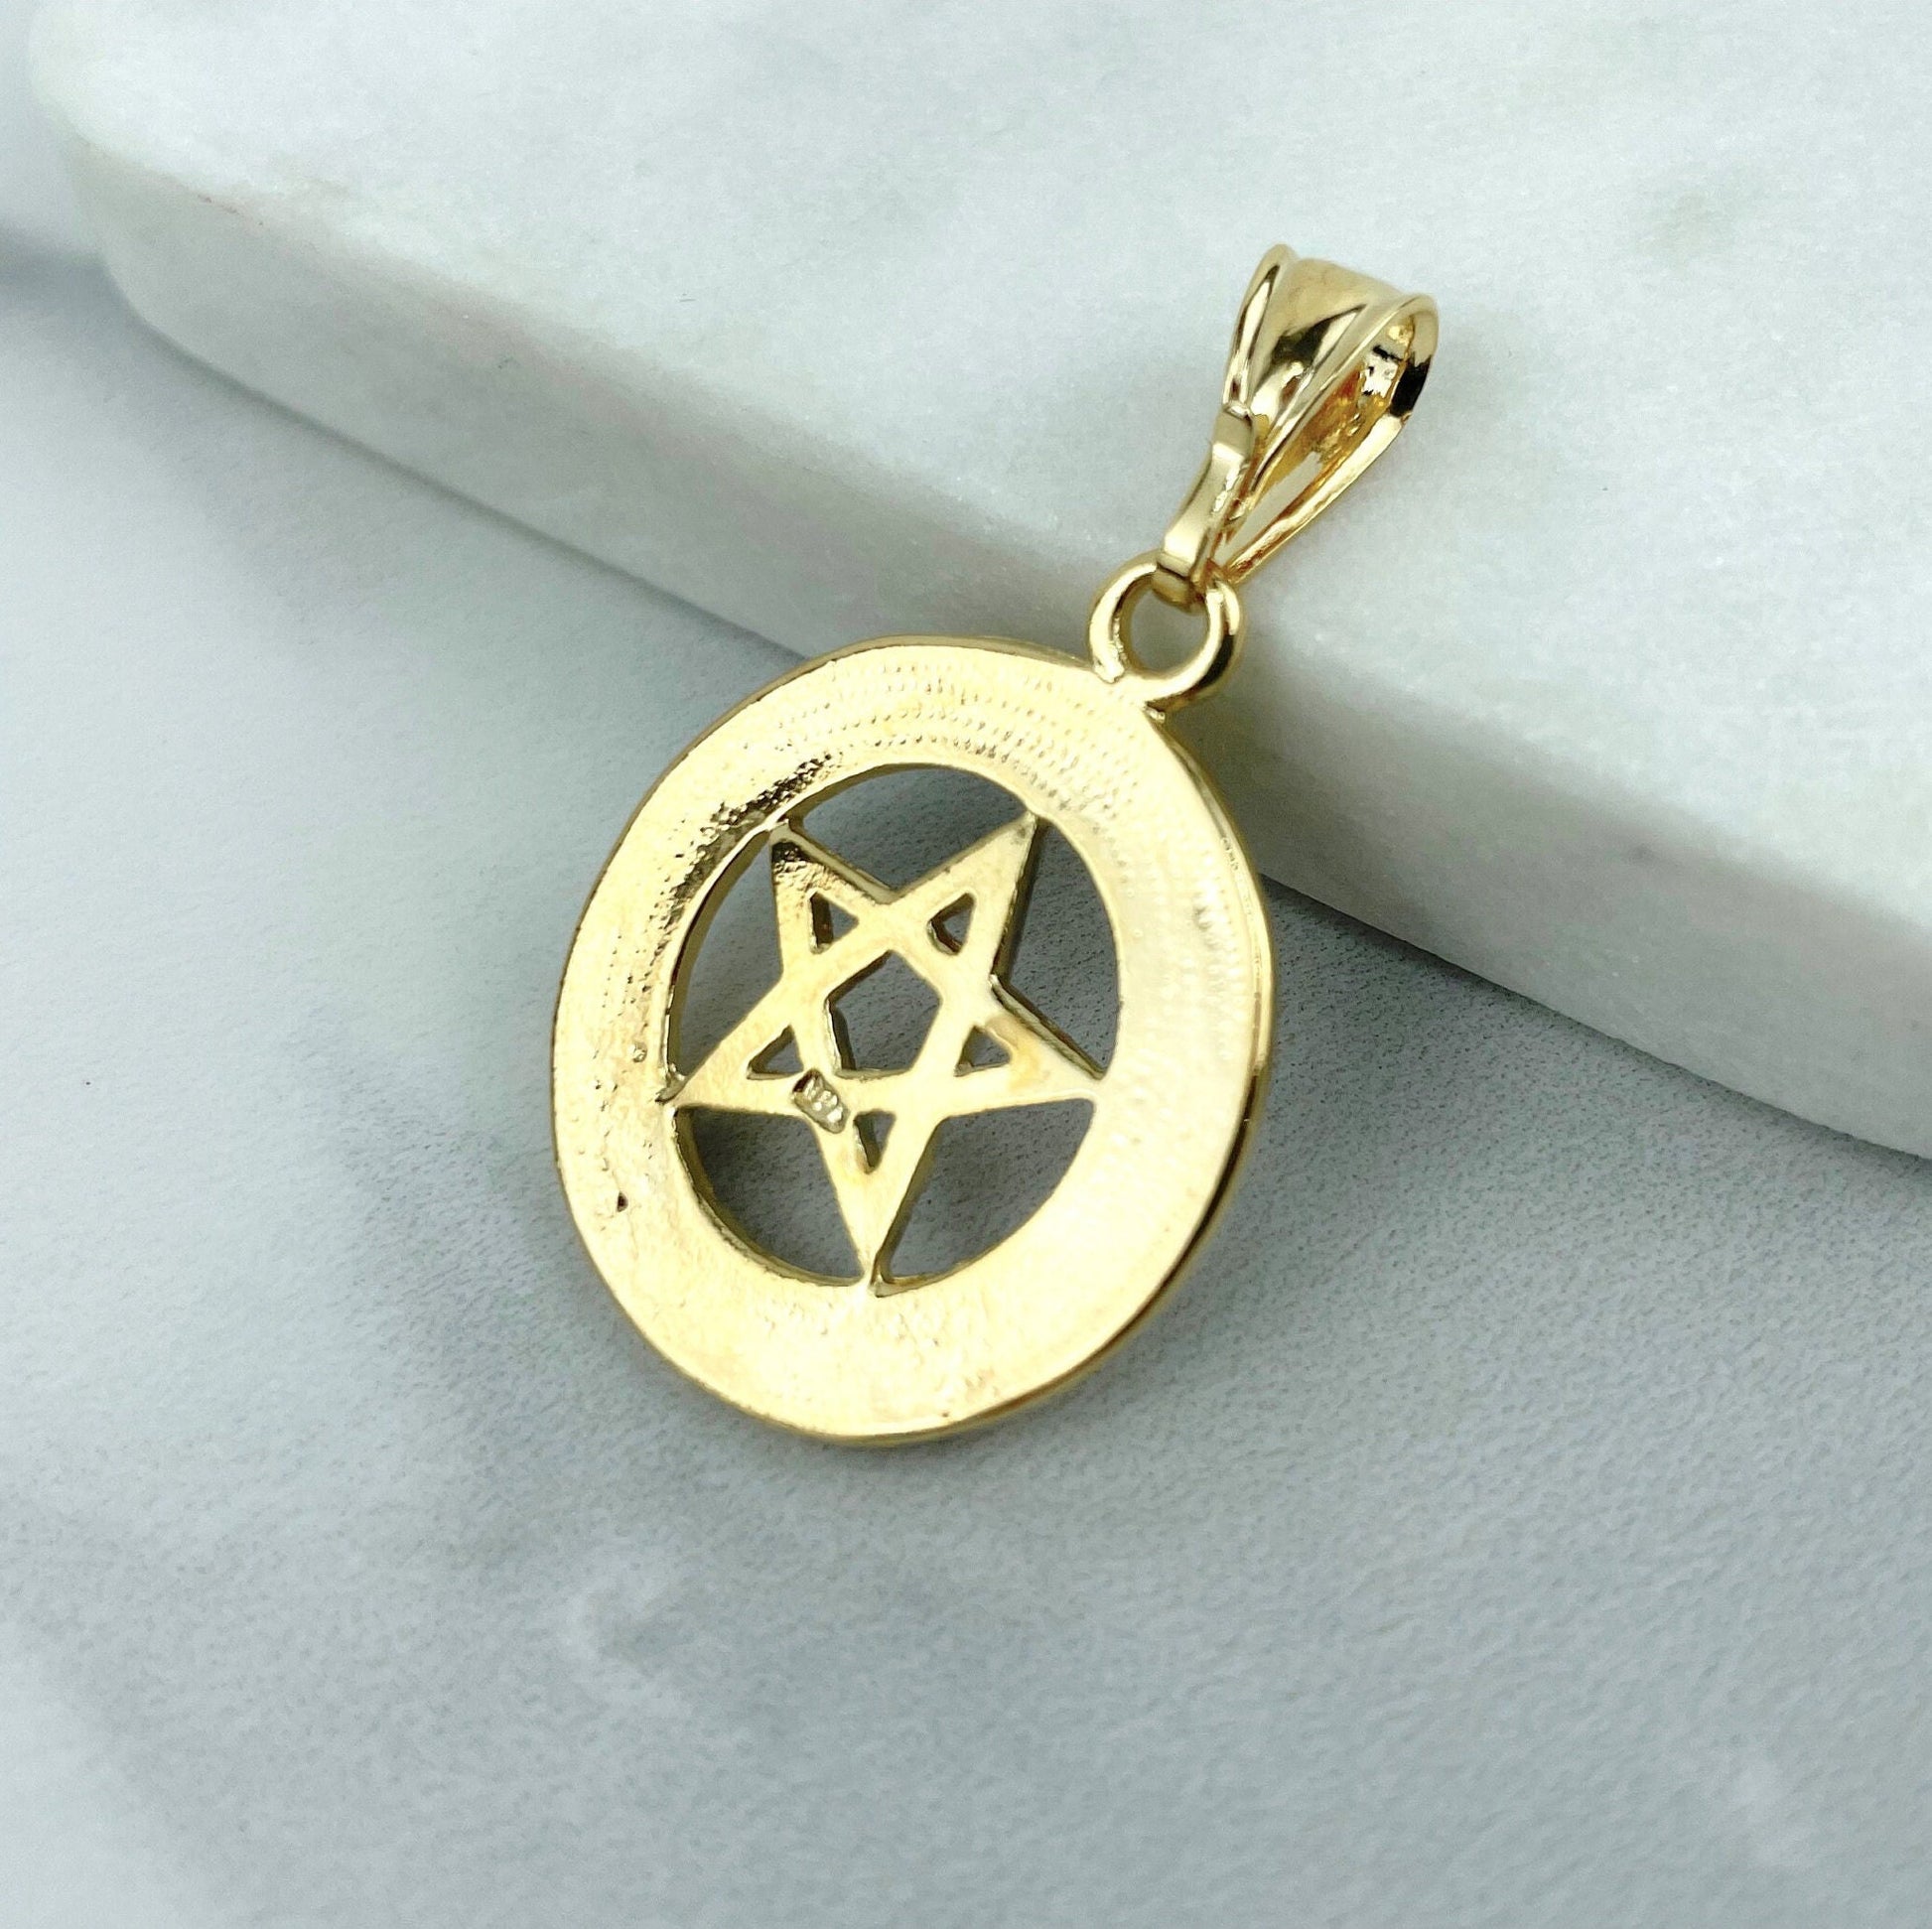 18k Gold Filled Texturized Star Of David Charms Pendant, Two Tone, Jewish Symbol, Religious Jewelry, Wholesale Jewelry Making Supplies